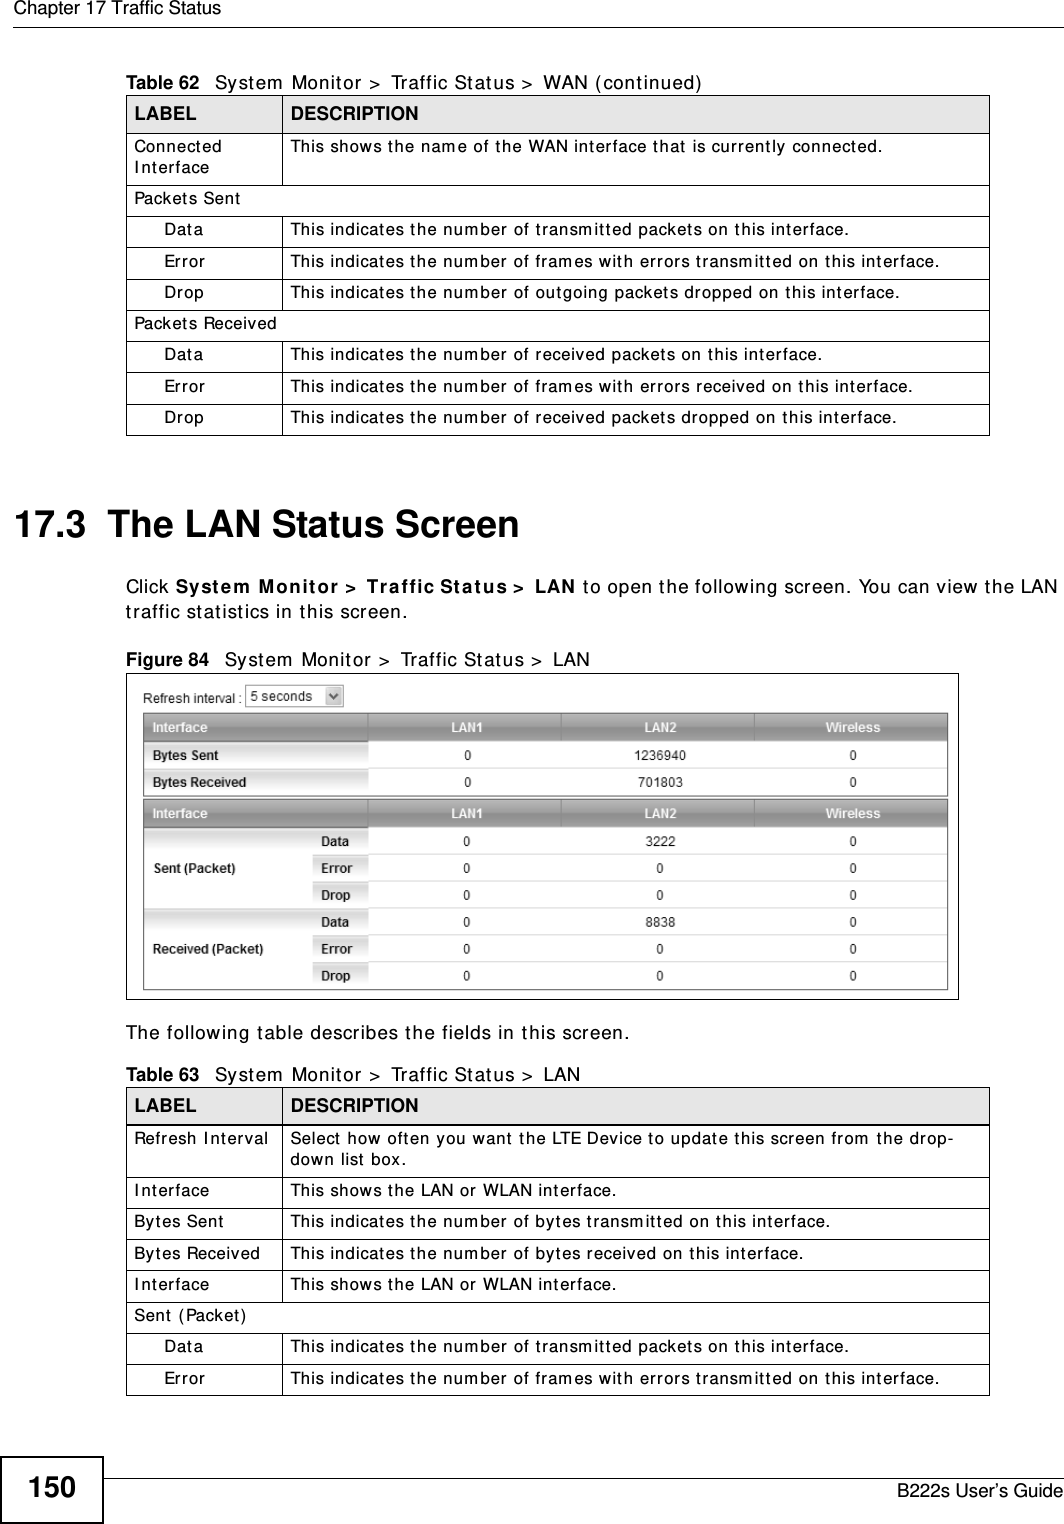 Chapter 17 Traffic StatusB222s User’s Guide15017.3  The LAN Status ScreenClick Syst e m  Monit or &gt;  Tra ffic St a tu s &gt;  LAN  t o open the following screen. You can view the LAN traffic stat ist ics in this screen.Figure 84   System  Monitor &gt;  Traffic Stat us &gt;  LANThe following t able describes t he fields in t his screen.   Connect ed I nt erface This shows t he nam e of t he WAN interface t hat  is currently connect ed.Packets Sent  Data  This indicates t he num ber of t ransm it ted packets on t his int erface.Error This indicates t he num ber of fram es w it h errors t ransm it t ed on this int erface.Drop This indicates t he num ber of out going packet s dropped on t his int erface.Packets ReceivedData  This indicates t he num ber of received packets on this int erface.Error This indicates t he num ber of fram es wit h errors received on t his interface.Drop This indicates t he num ber of received packet s dropped on t his interface.Table 62   Syst em  Monit or &gt;  Traffic St atus &gt;  WAN (continued)LABEL DESCRIPTIONTable 63   Syst em  Monit or &gt;  Traffic St atus &gt;  LANLABEL DESCRIPTIONRefresh I nt erval Select  how  oft en y ou want  the LTE Device t o updat e t his screen fr om  t he drop-down list box.I nt erface This shows t he LAN or WLAN int erface. Byt es Sent This indicat es t he num ber of by t es t ransm it t ed on t his int erface.By t es Received This indicat es t he num ber of byt es received on this int erface.I nt erface This shows t he LAN or WLAN int erface. Sent  (Packet)   Data  This indicates t he num ber of t ransm it ted packets on t his int erface.Error This indicates t he num ber of fram es w it h errors t ransm it t ed on this int erface.